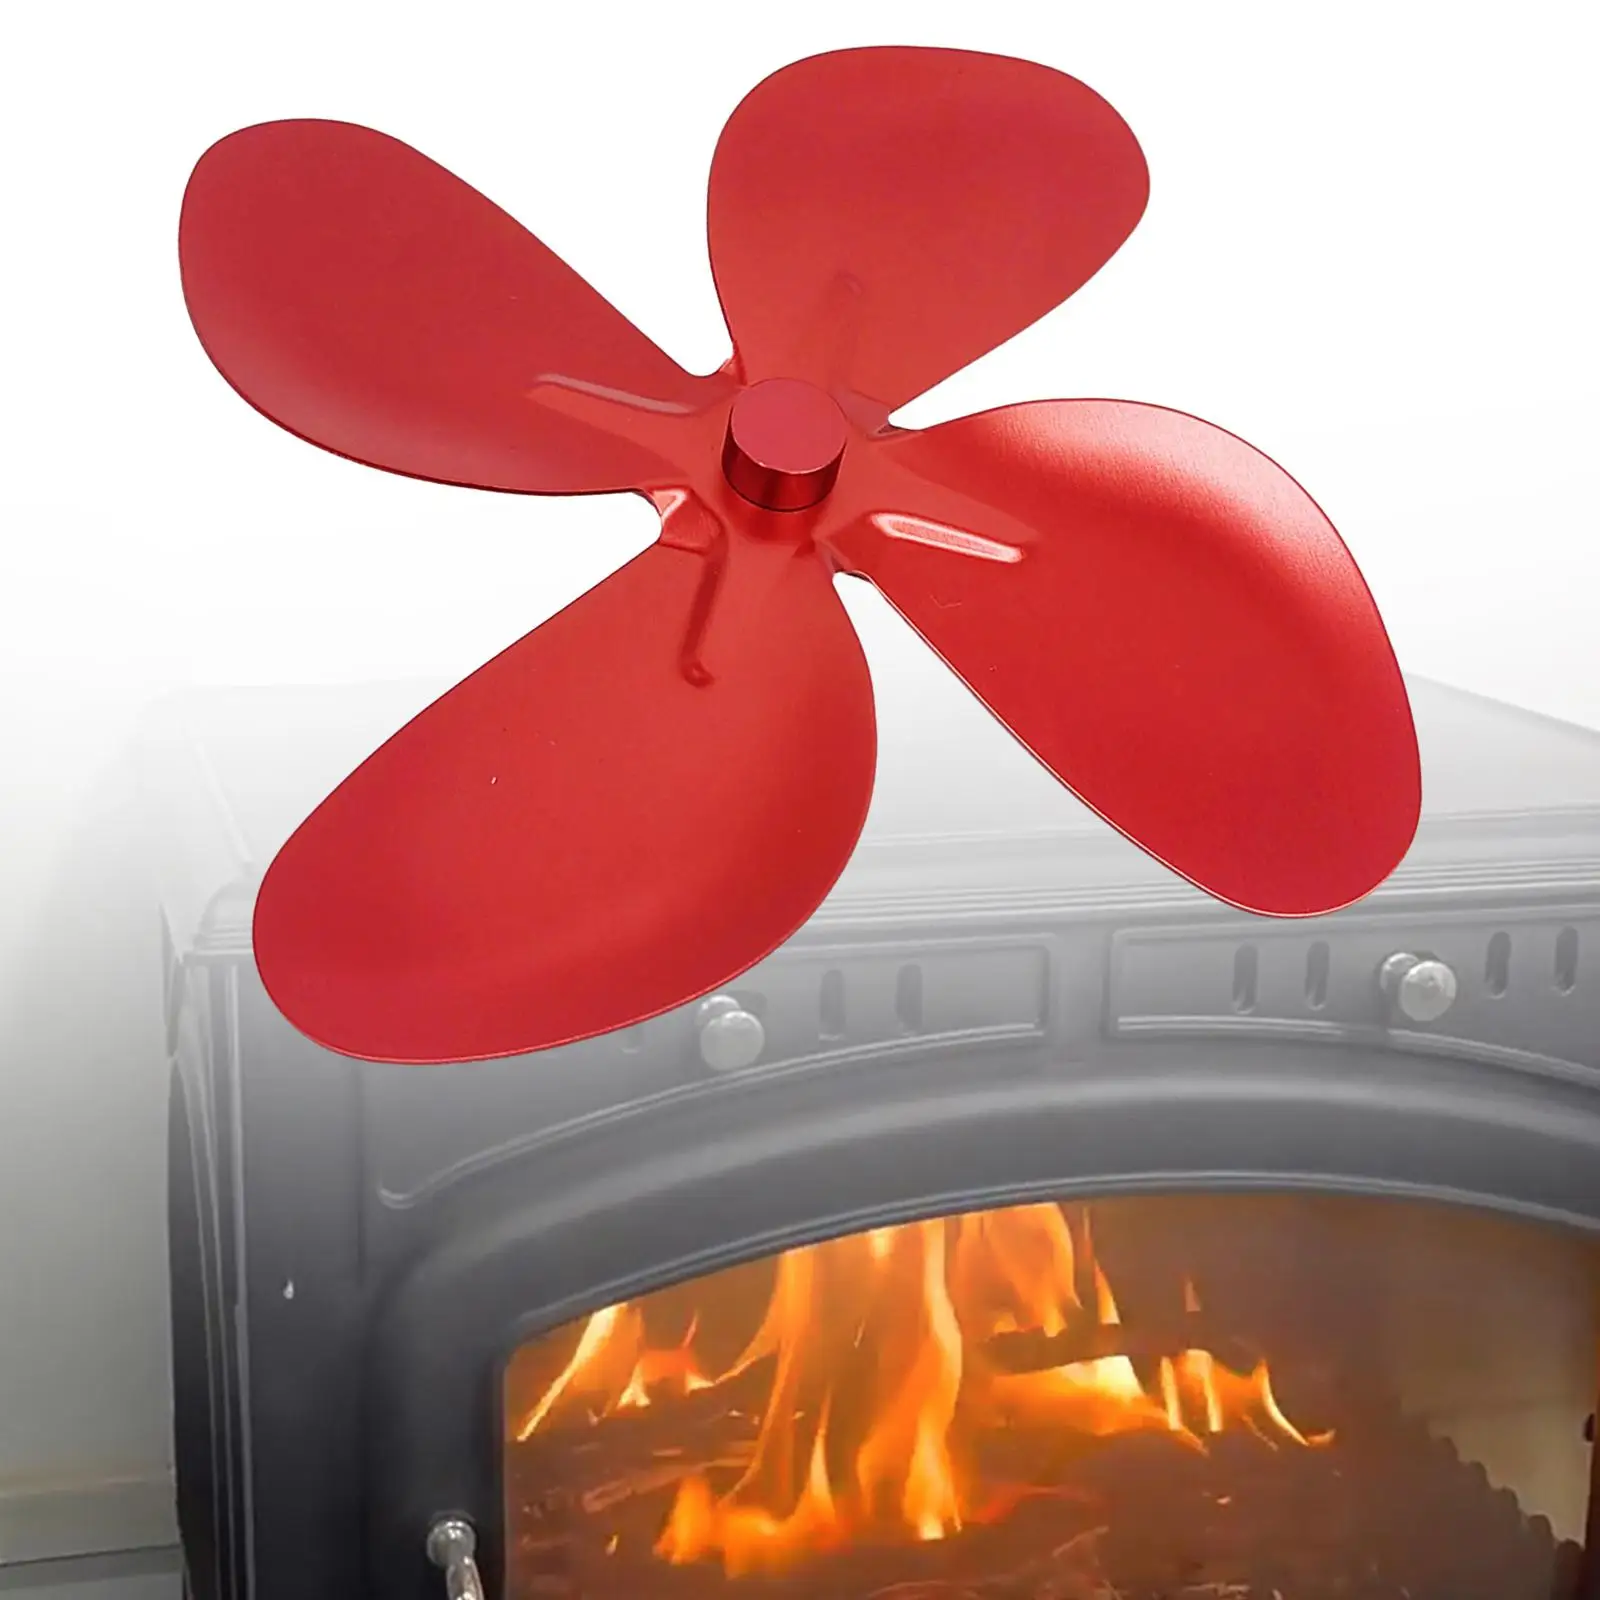 Stoves Fan Blade 17.5cm Upgraded Fireplace Spare Parts Quiet Circulating Warm Airs More Warm Fans Fan Blade Replacement